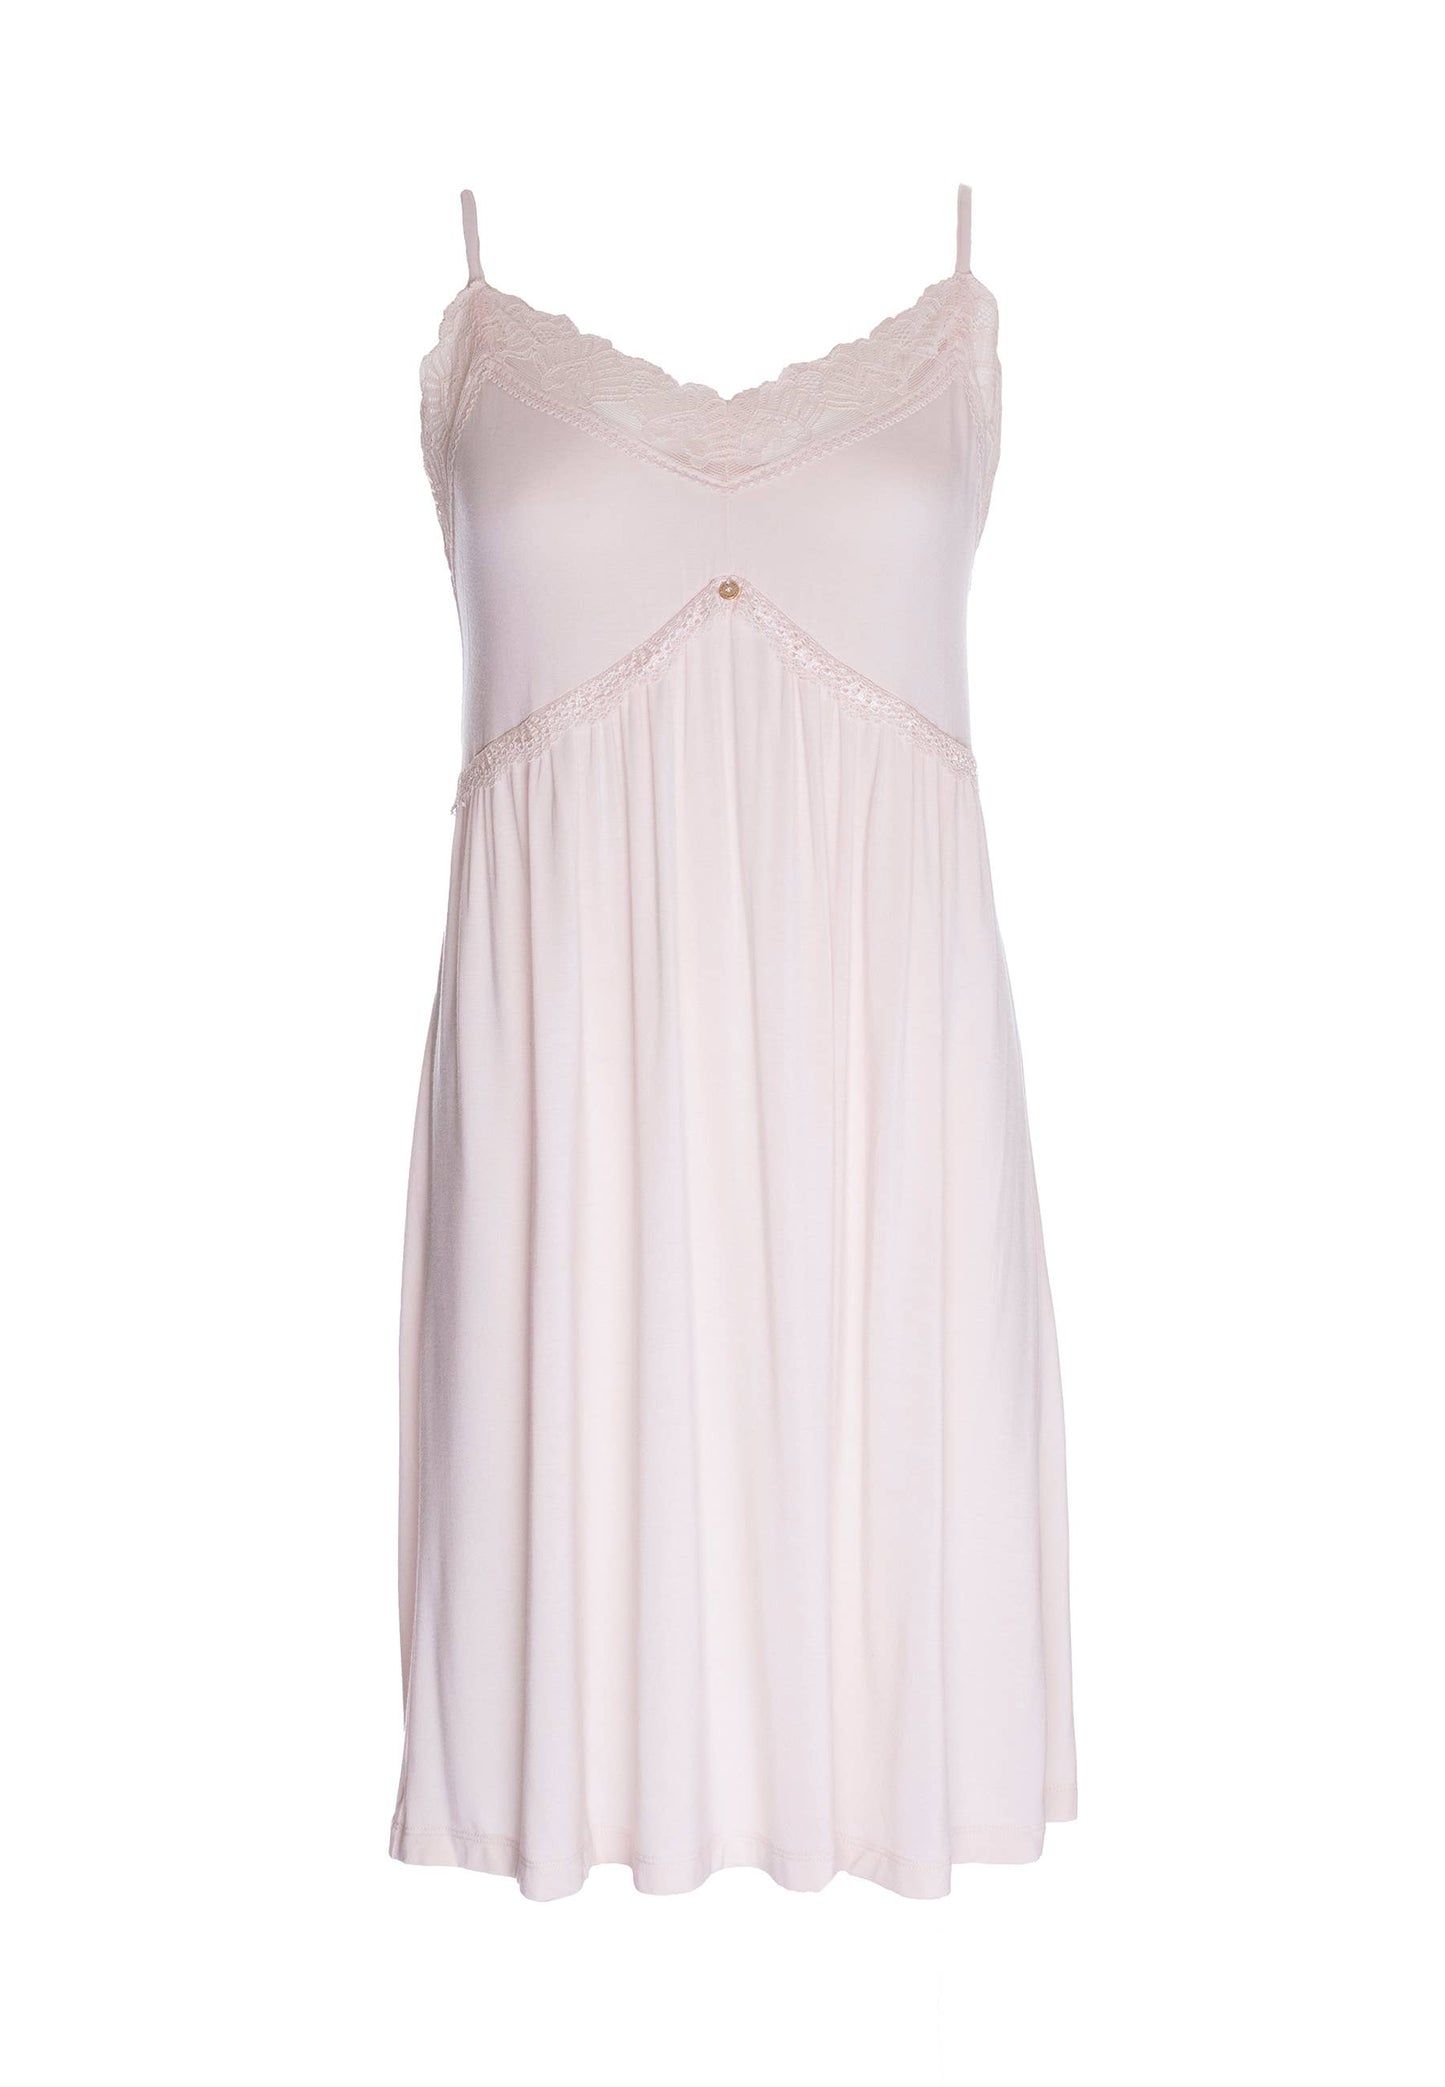 Bamboo Lace Chemise Nightie in Powder Puff